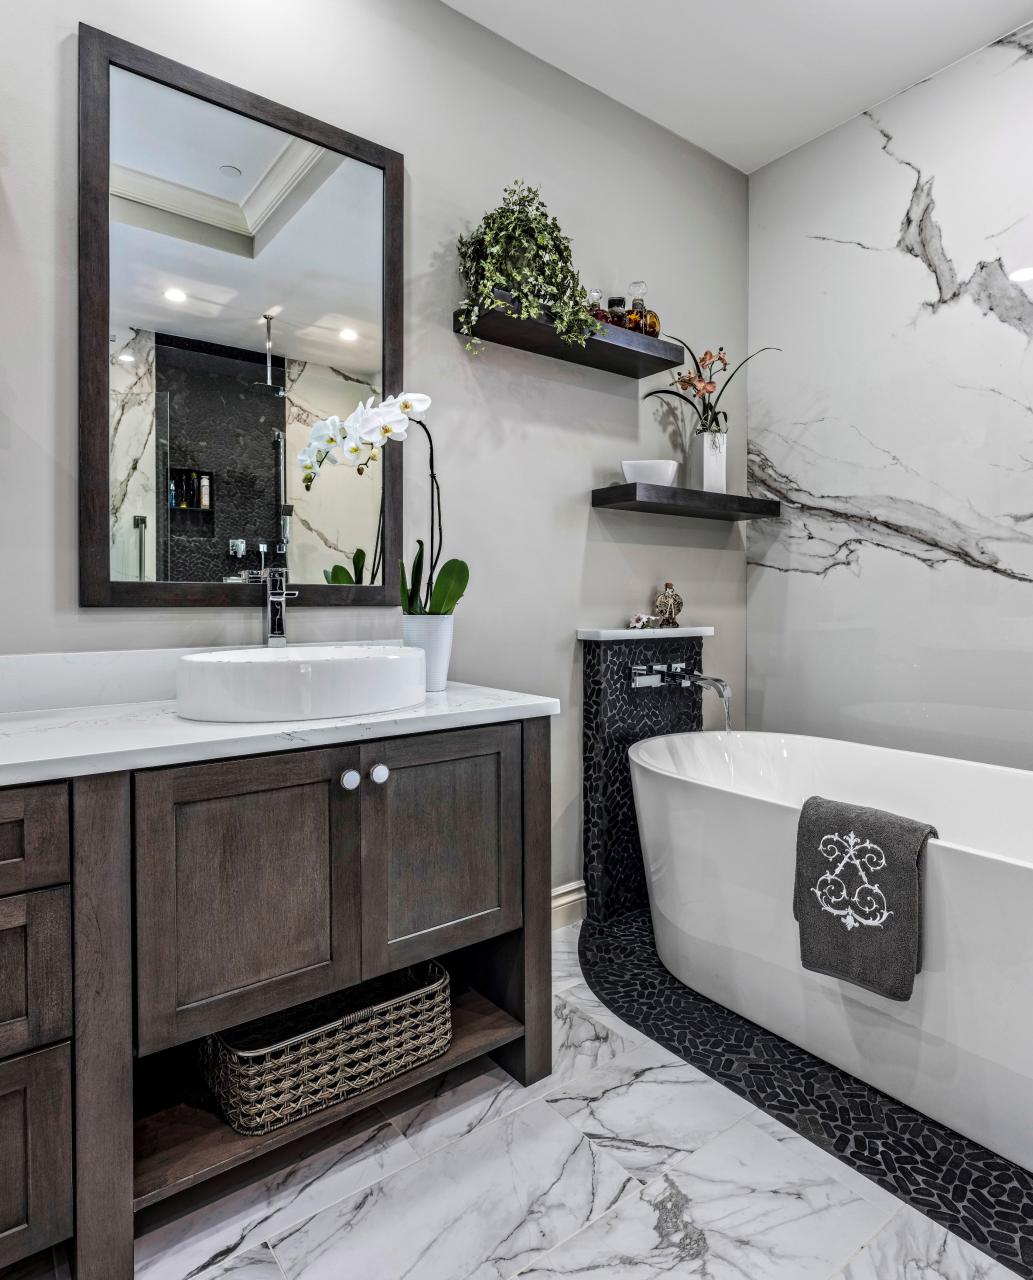 How Much Does Bathroom Remodeling Typically Cost? Bakersfield